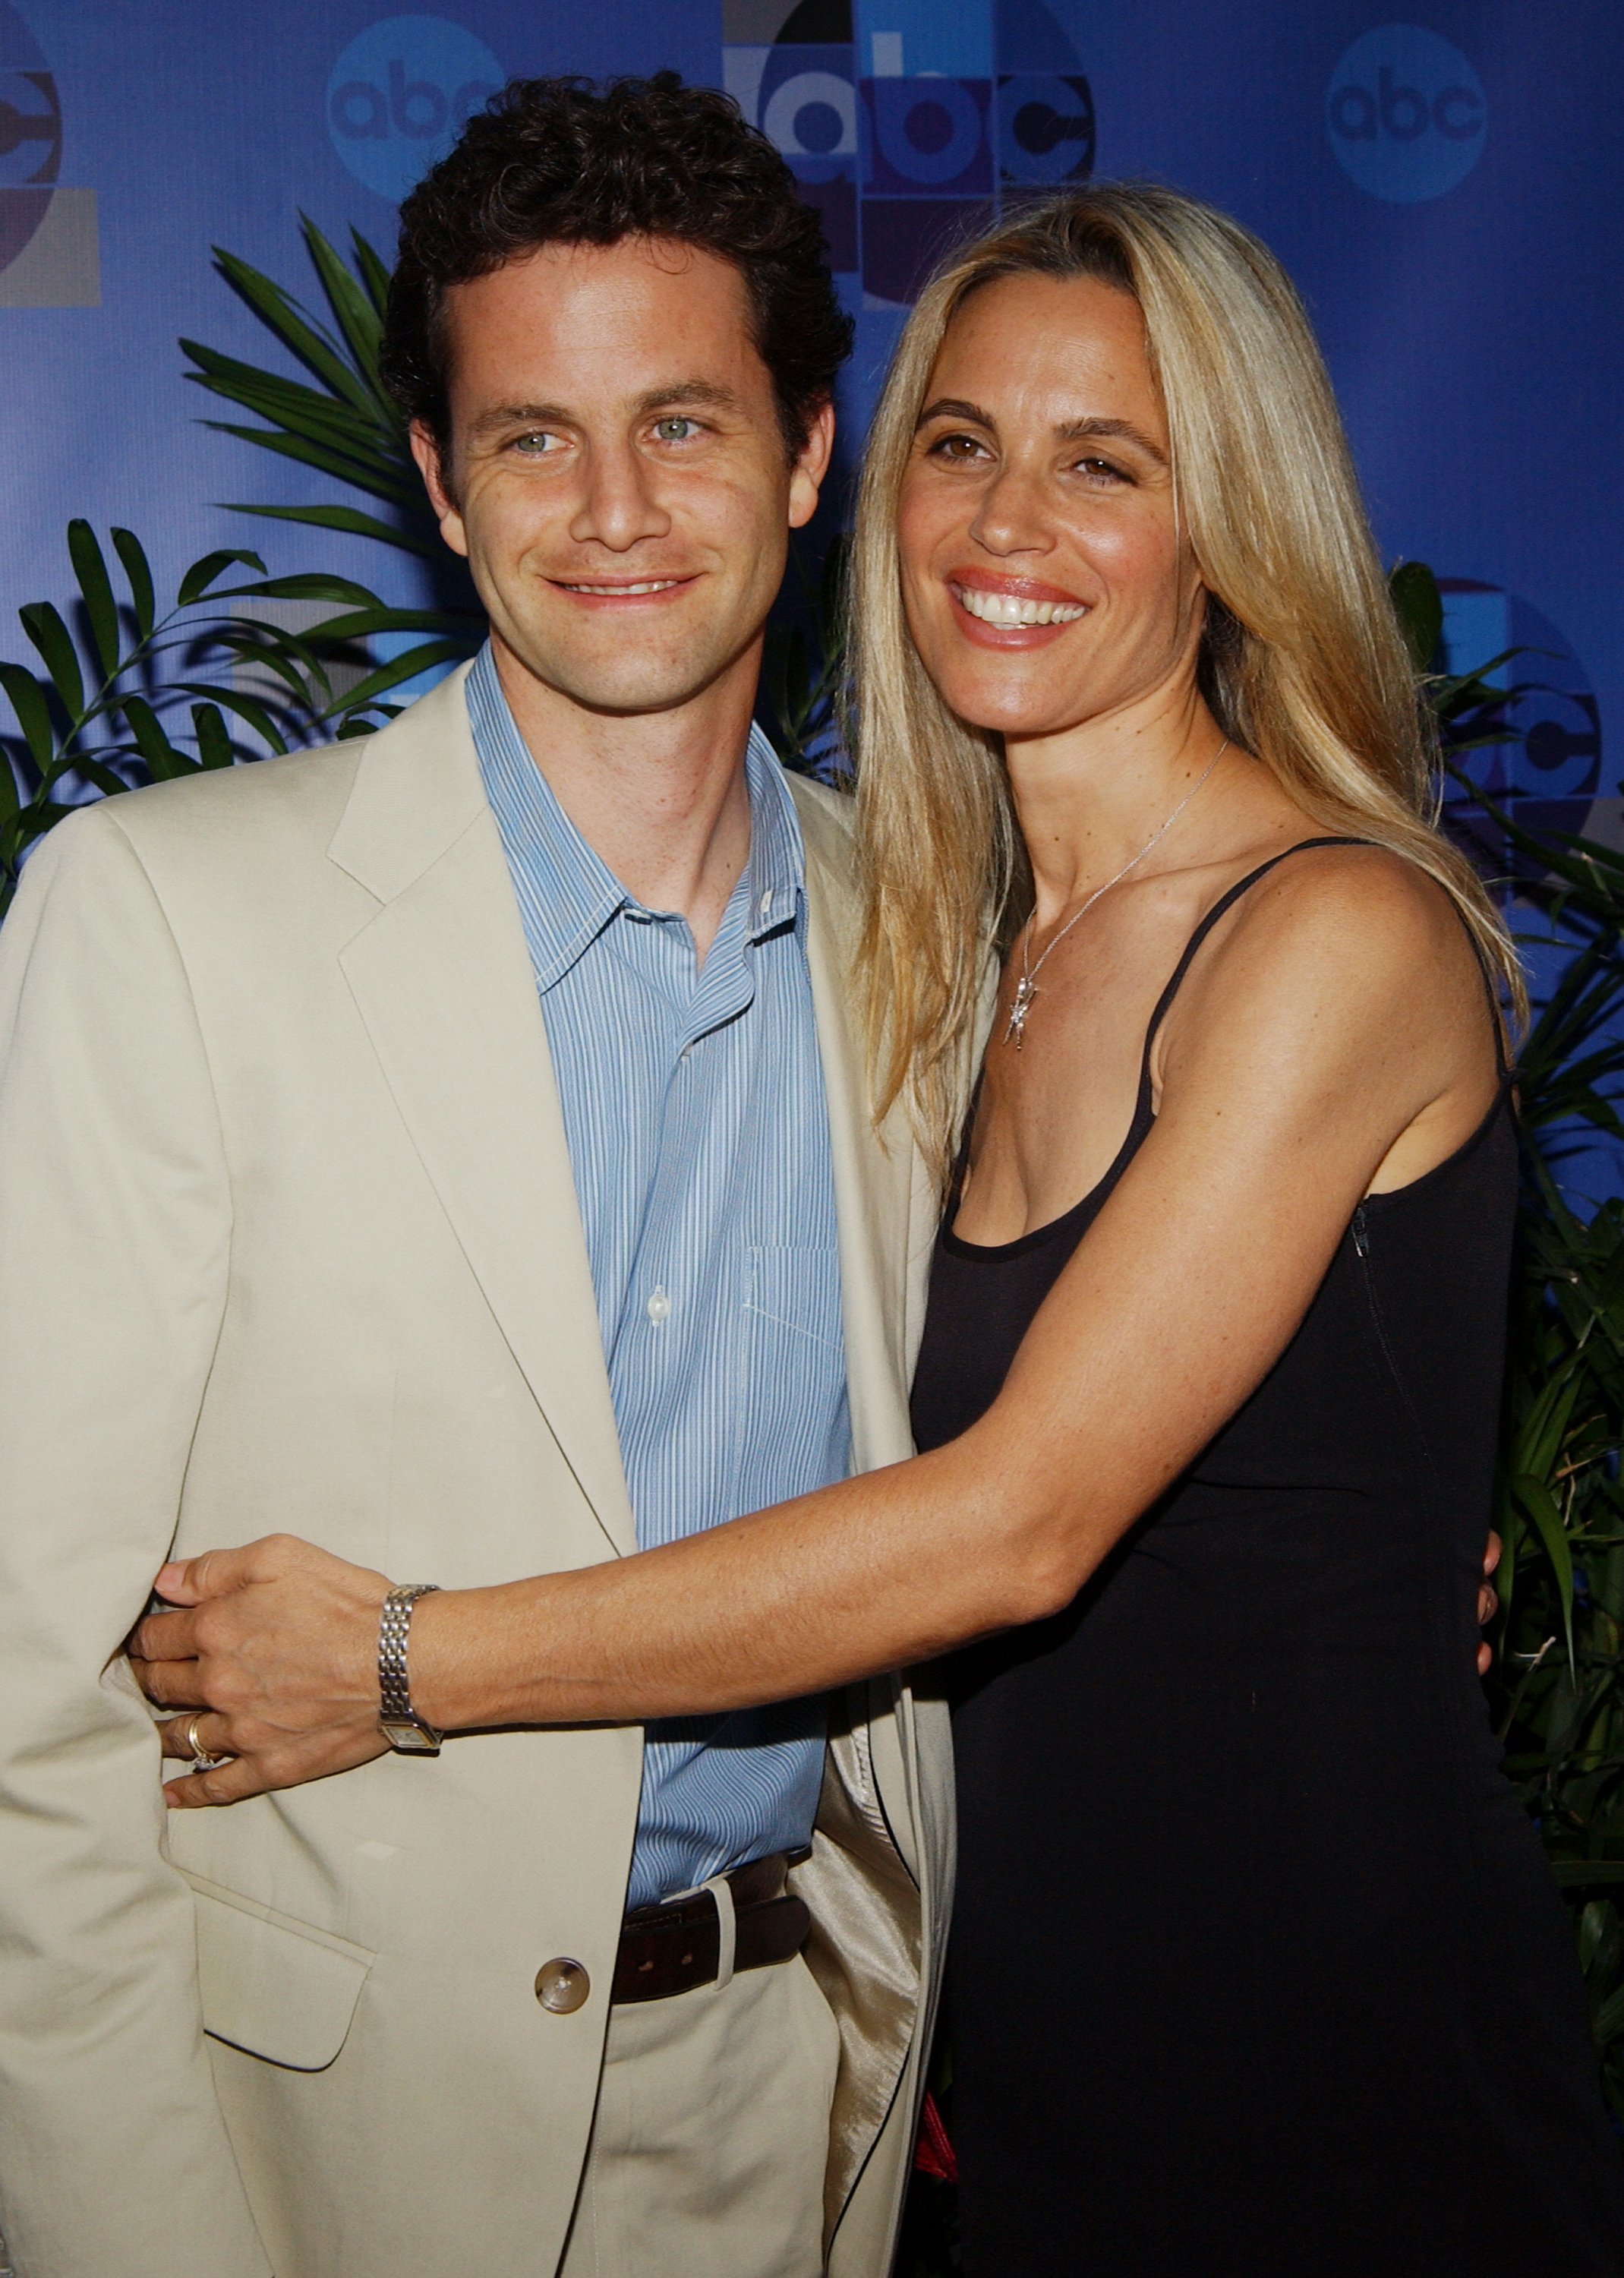 Kirk Cameron and his wife, actress Chelsea Noble, during the 2004 ABC All-Star Party at C2 CafZ on July 13, 2004 in Century City, California | Source: Getty Images